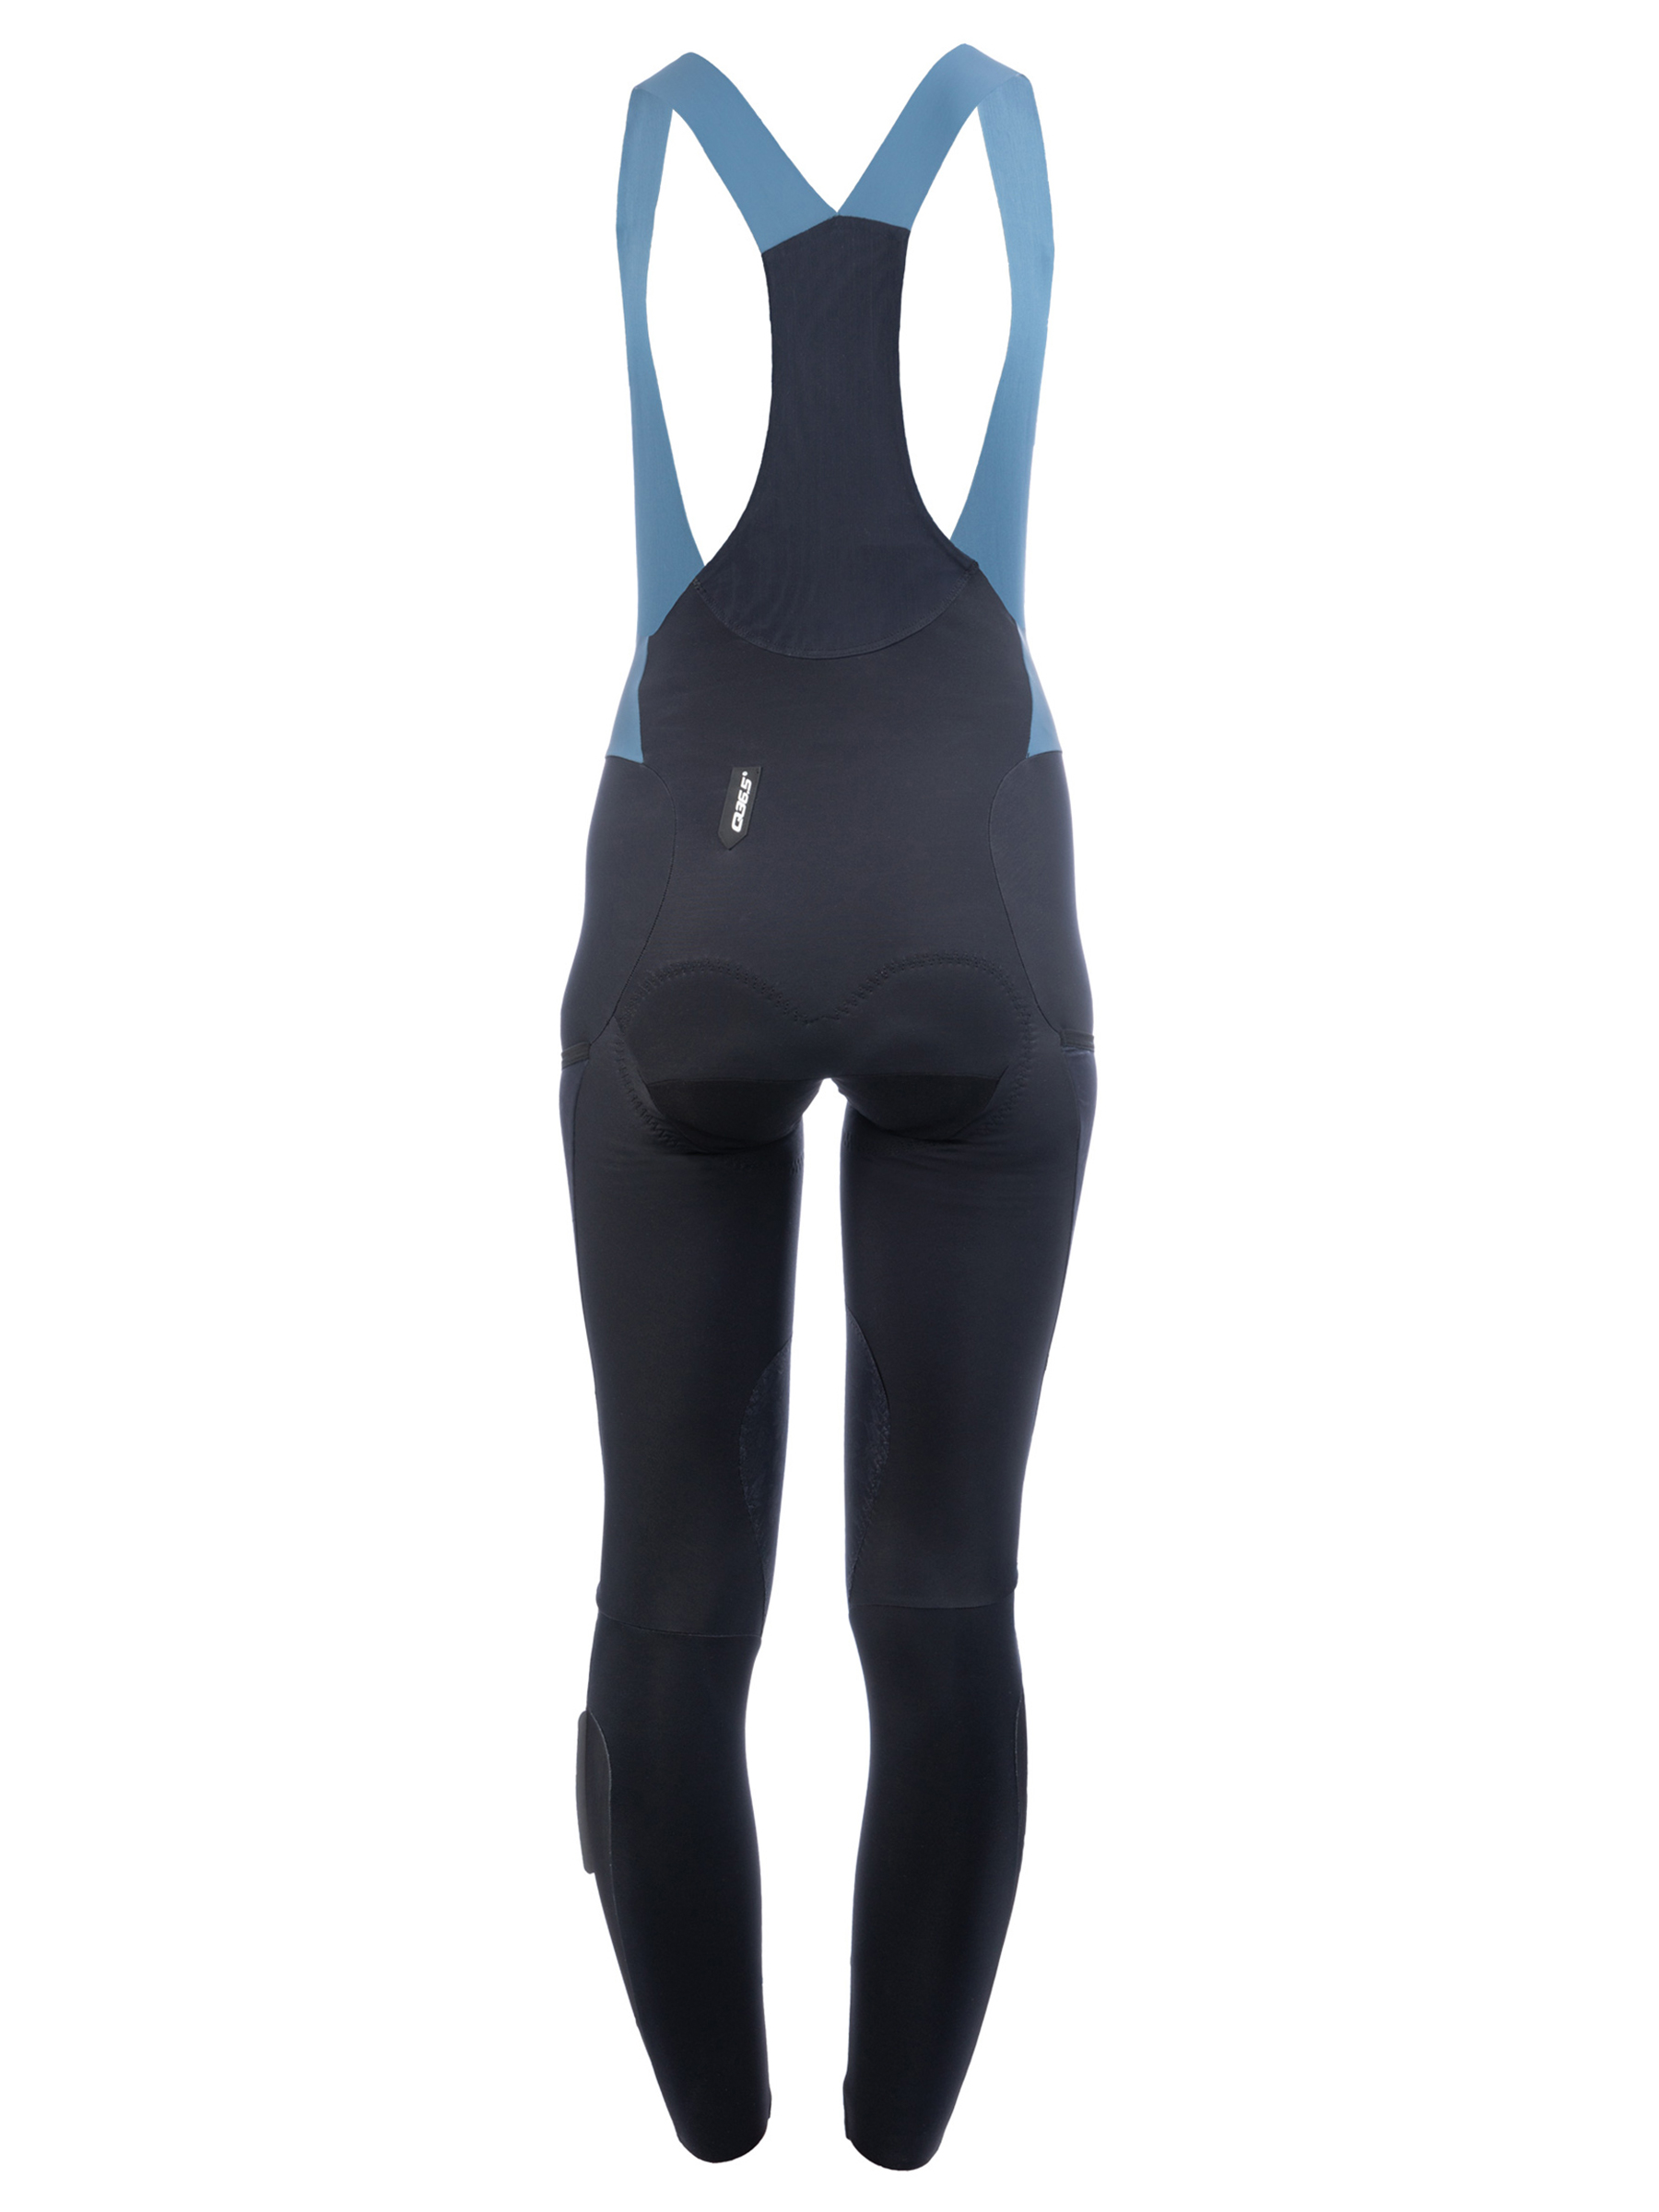 Breathable thermal tights for women special winter -20°C